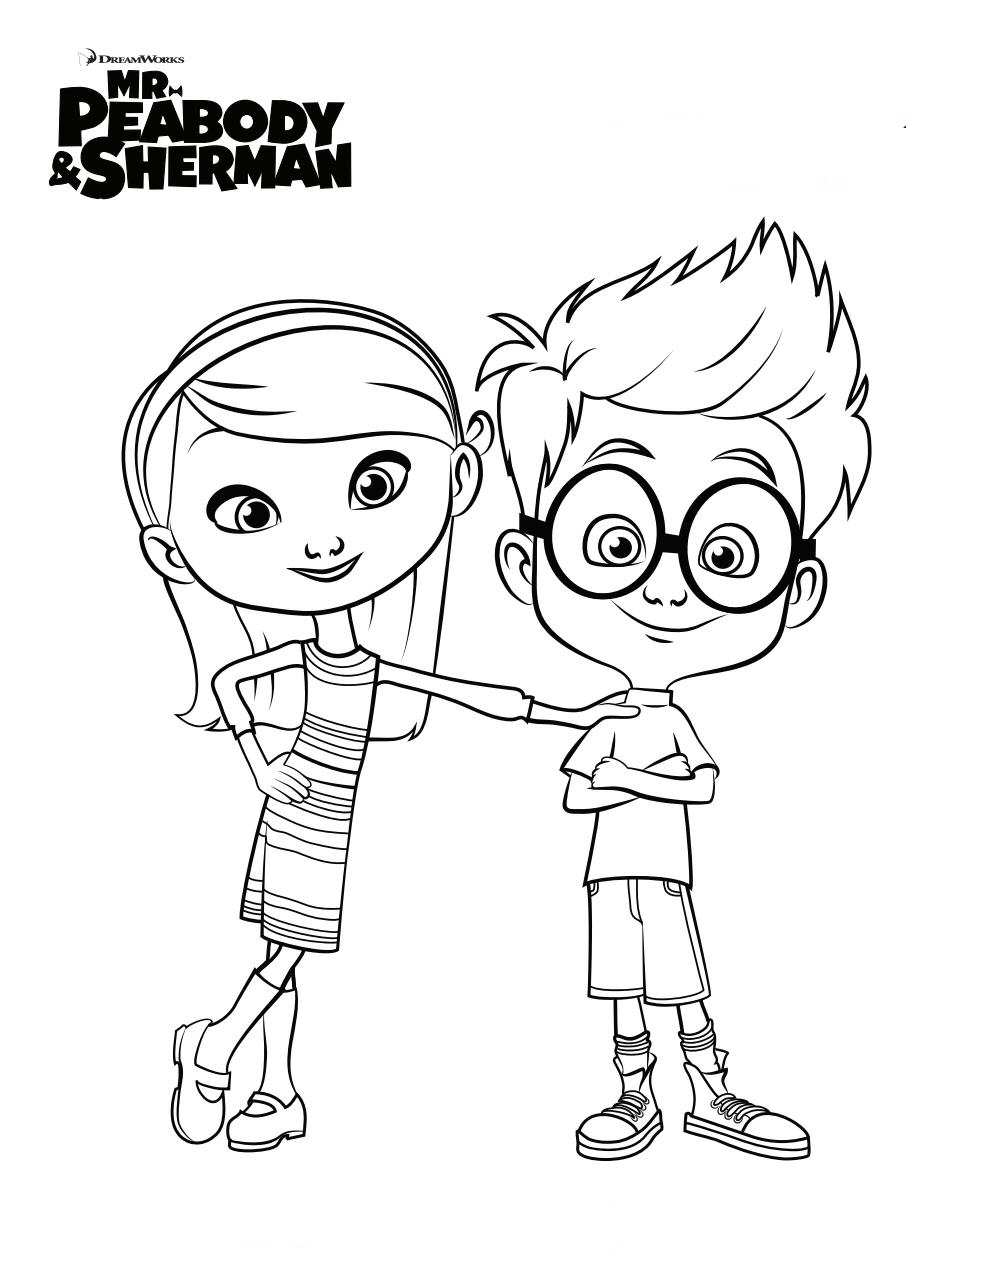 Kids-n-fun.com | 6 coloring pages of Mr Peabody and Sherman